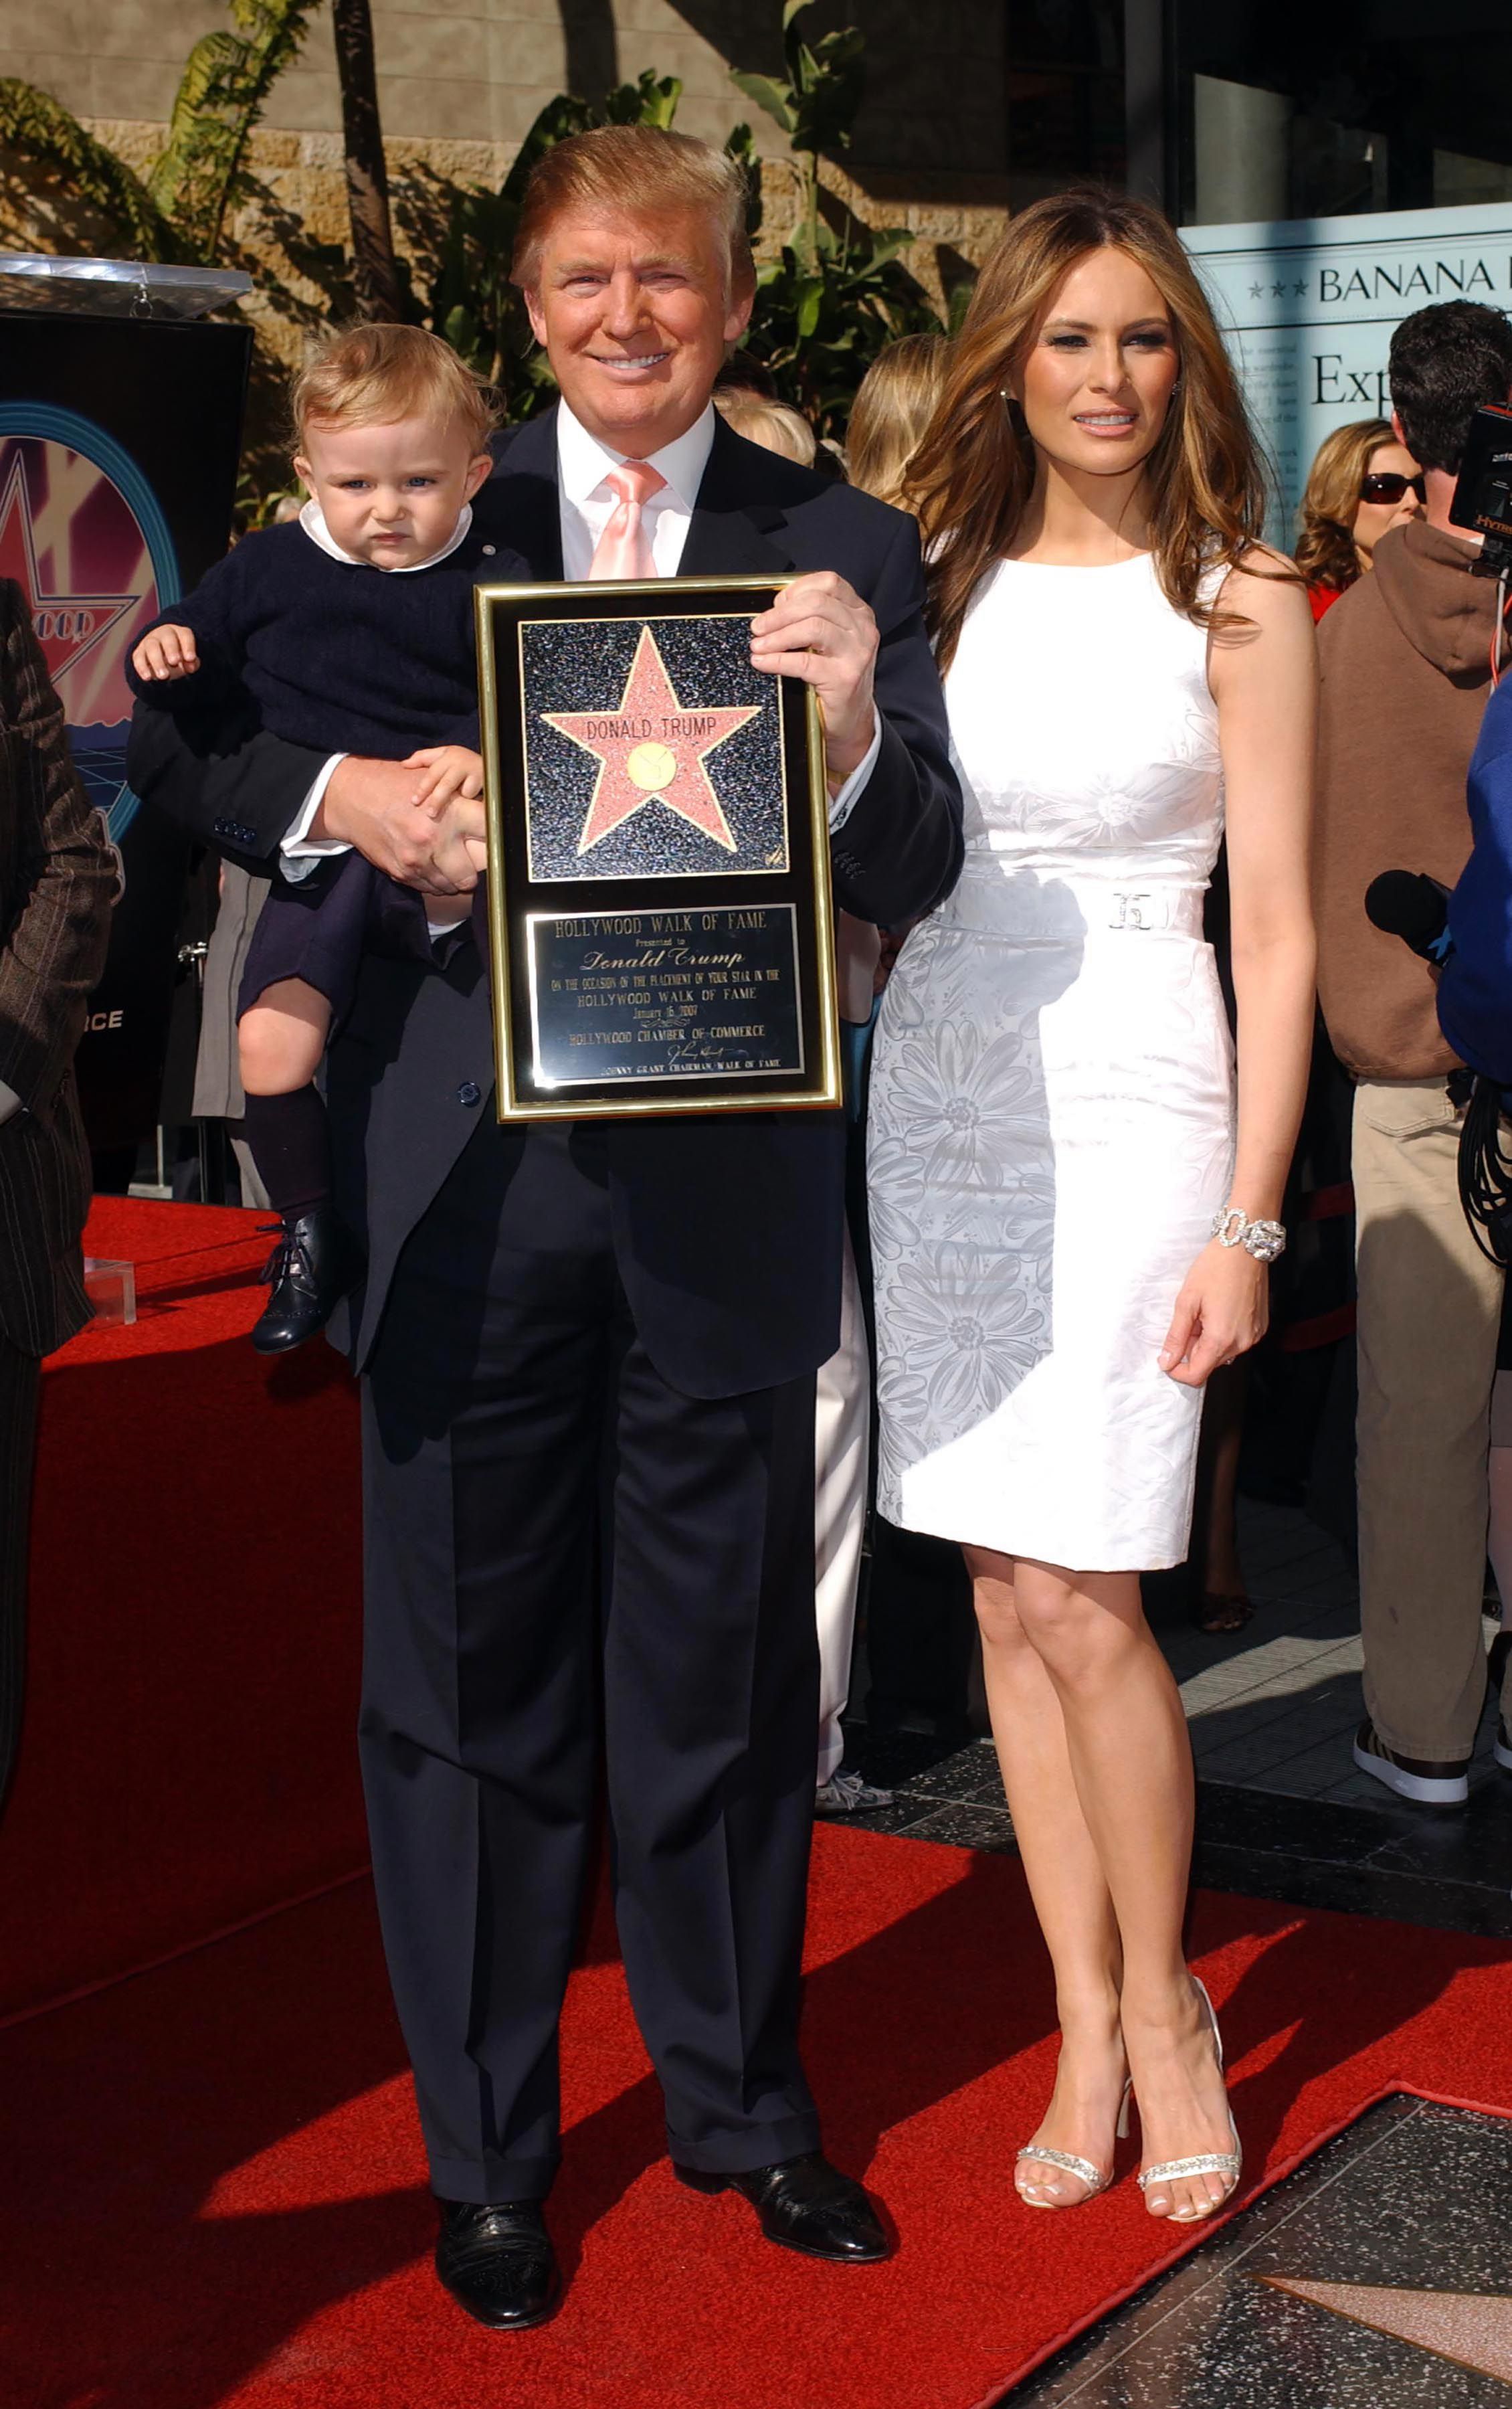 The Trumps are seen here in 2007 during the president's Walk of Fame Ceremony in Hollywood, California